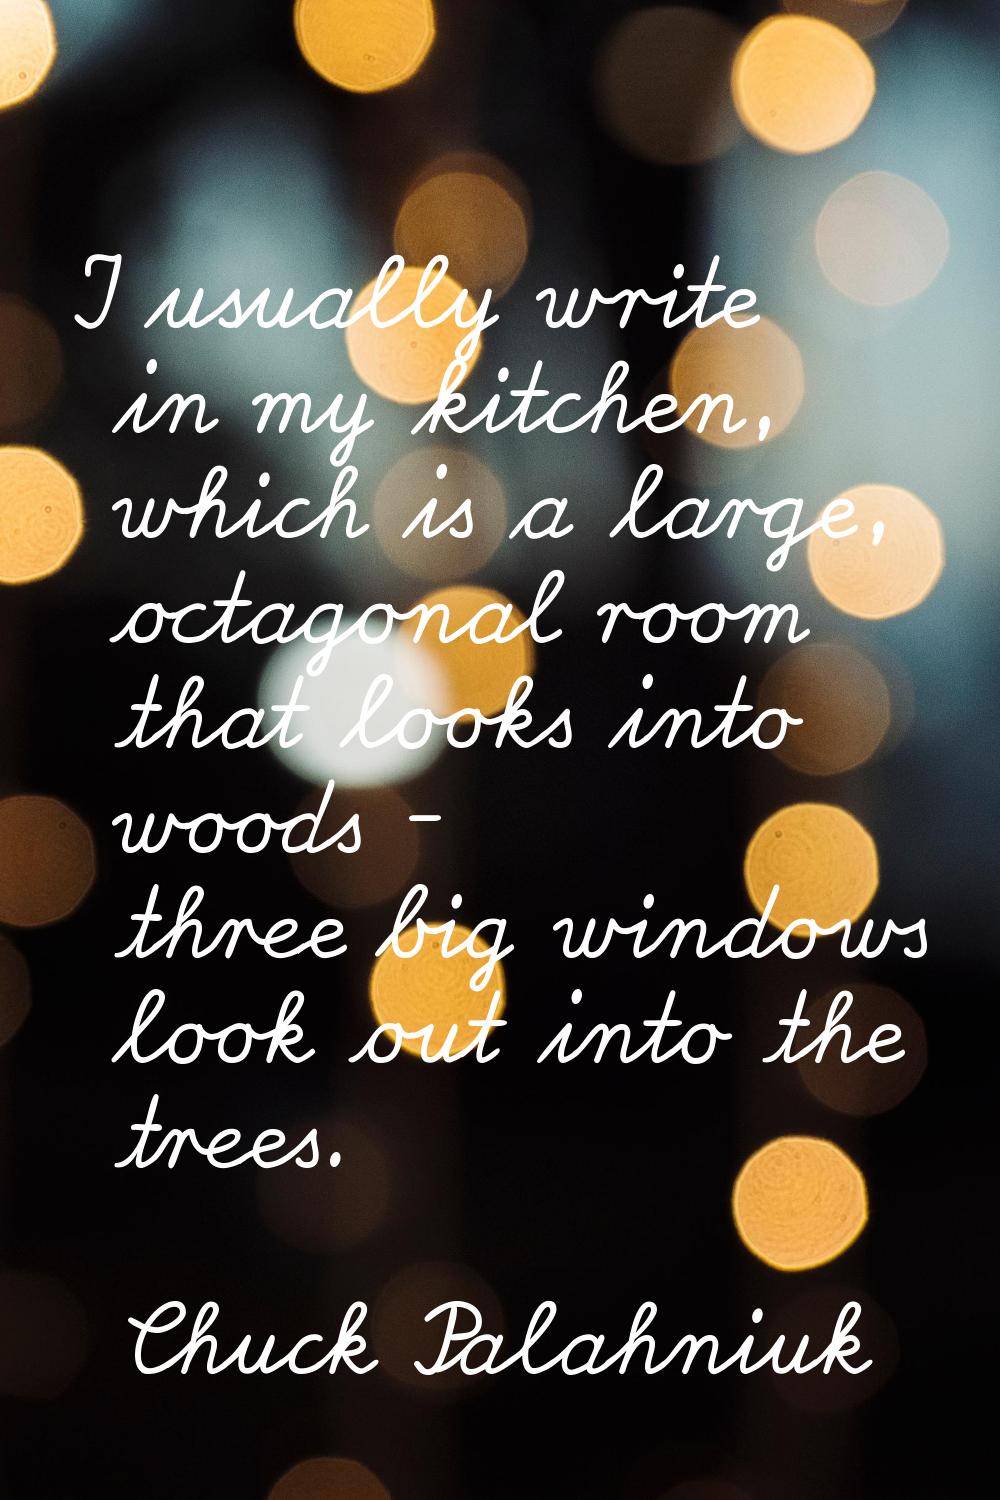 I usually write in my kitchen, which is a large, octagonal room that looks into woods - three big w